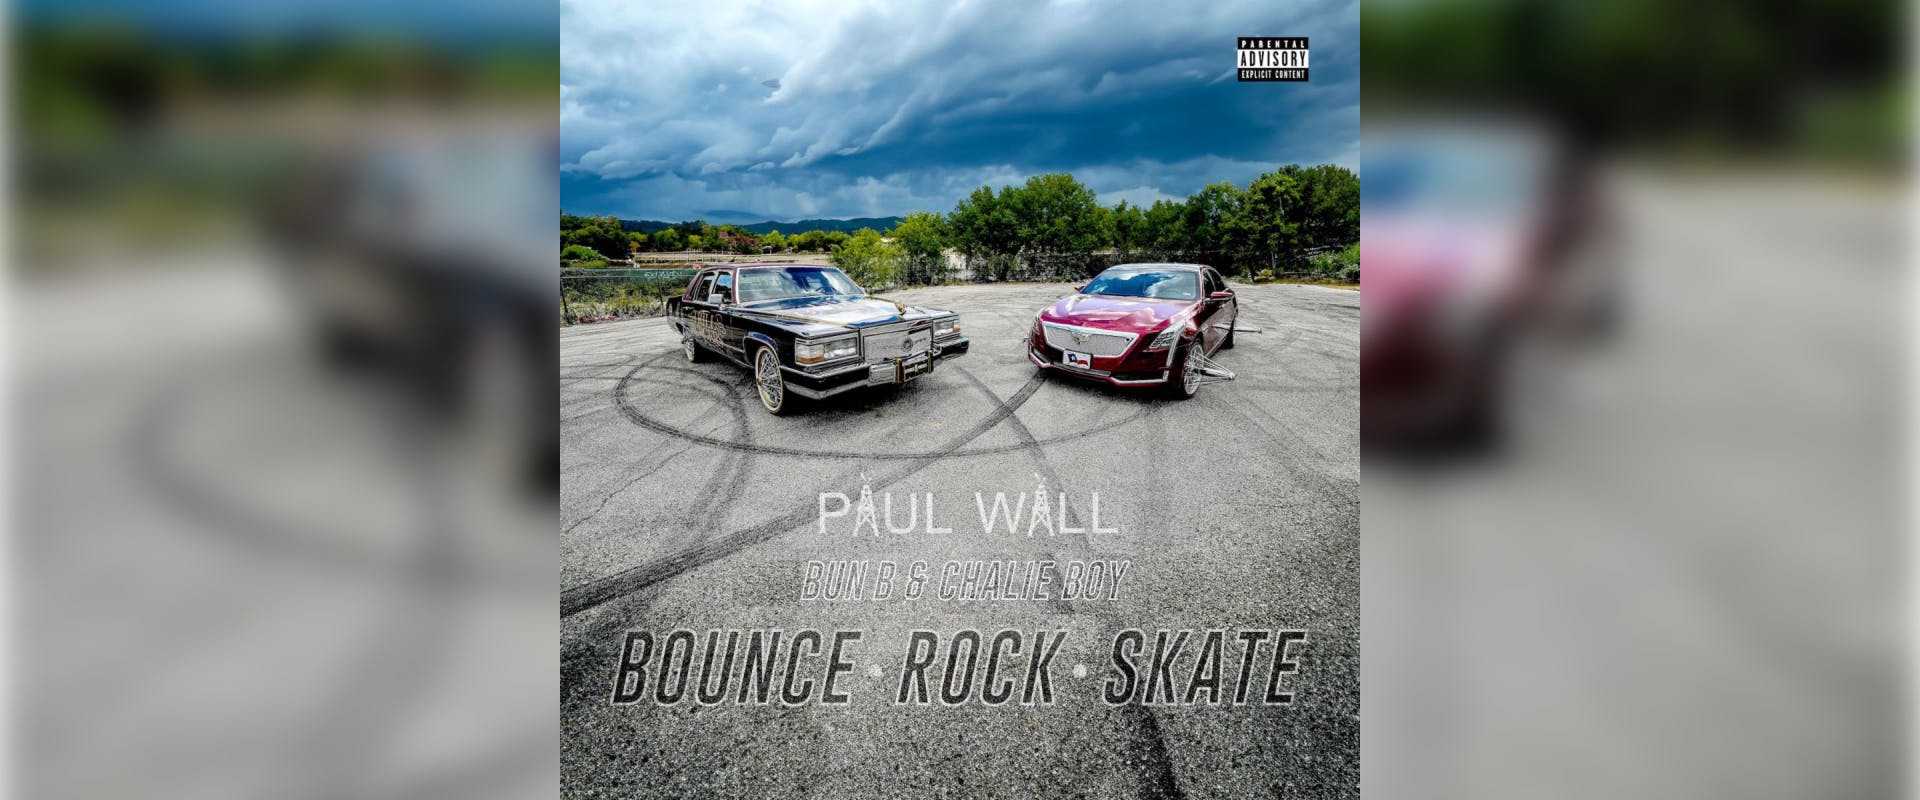 Paul Wall And Bun B Pay Respect To Houston Slab Riders On 'Bounce, Rock,  Skate